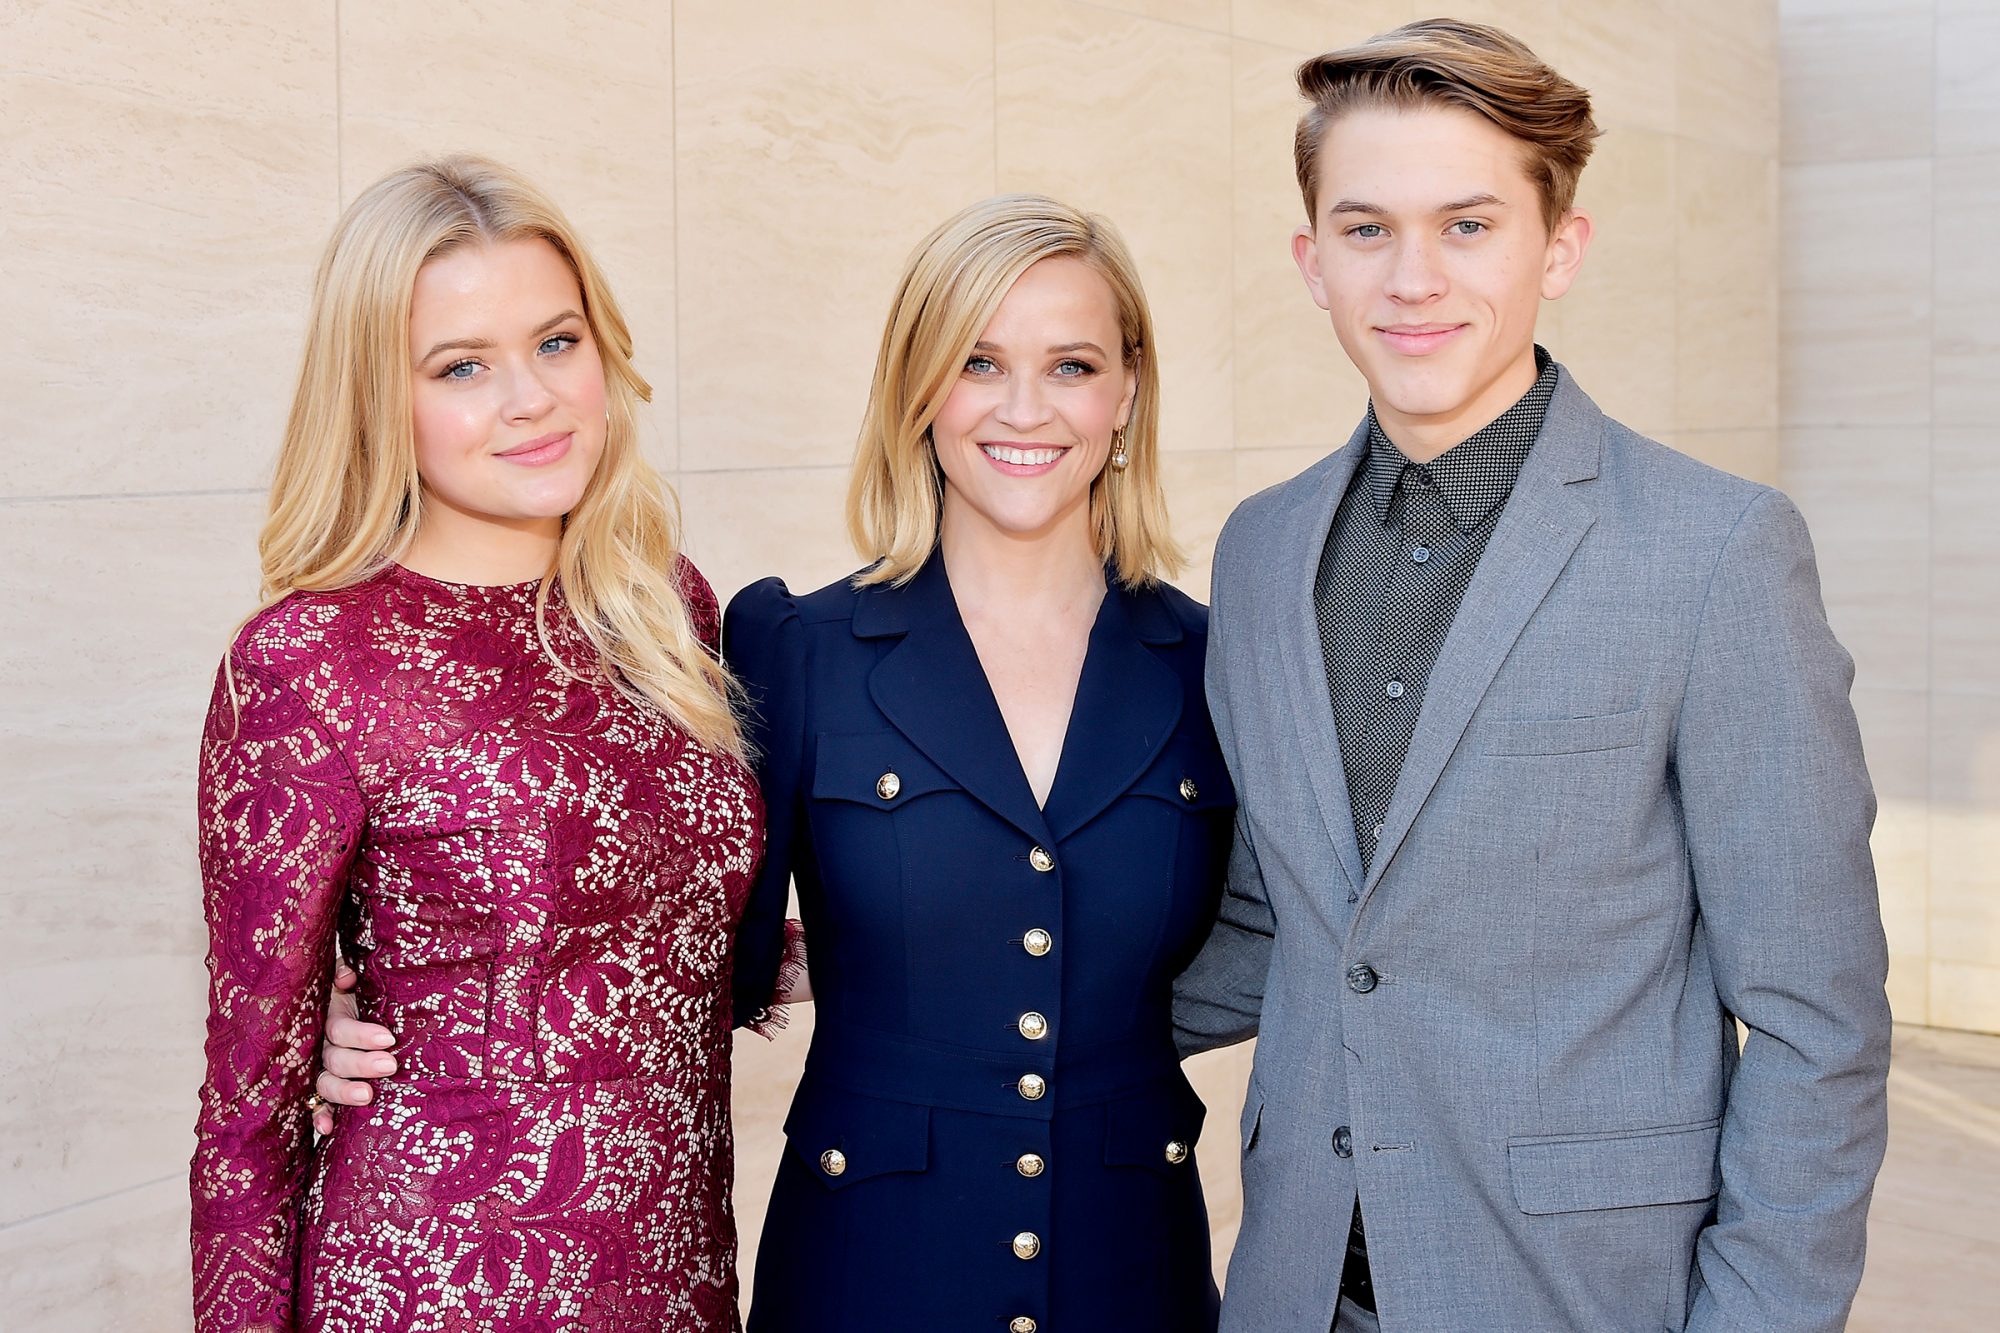 Reese Witherspoon Confesses That She Burst Into Tears Over an Offensive Caricature!